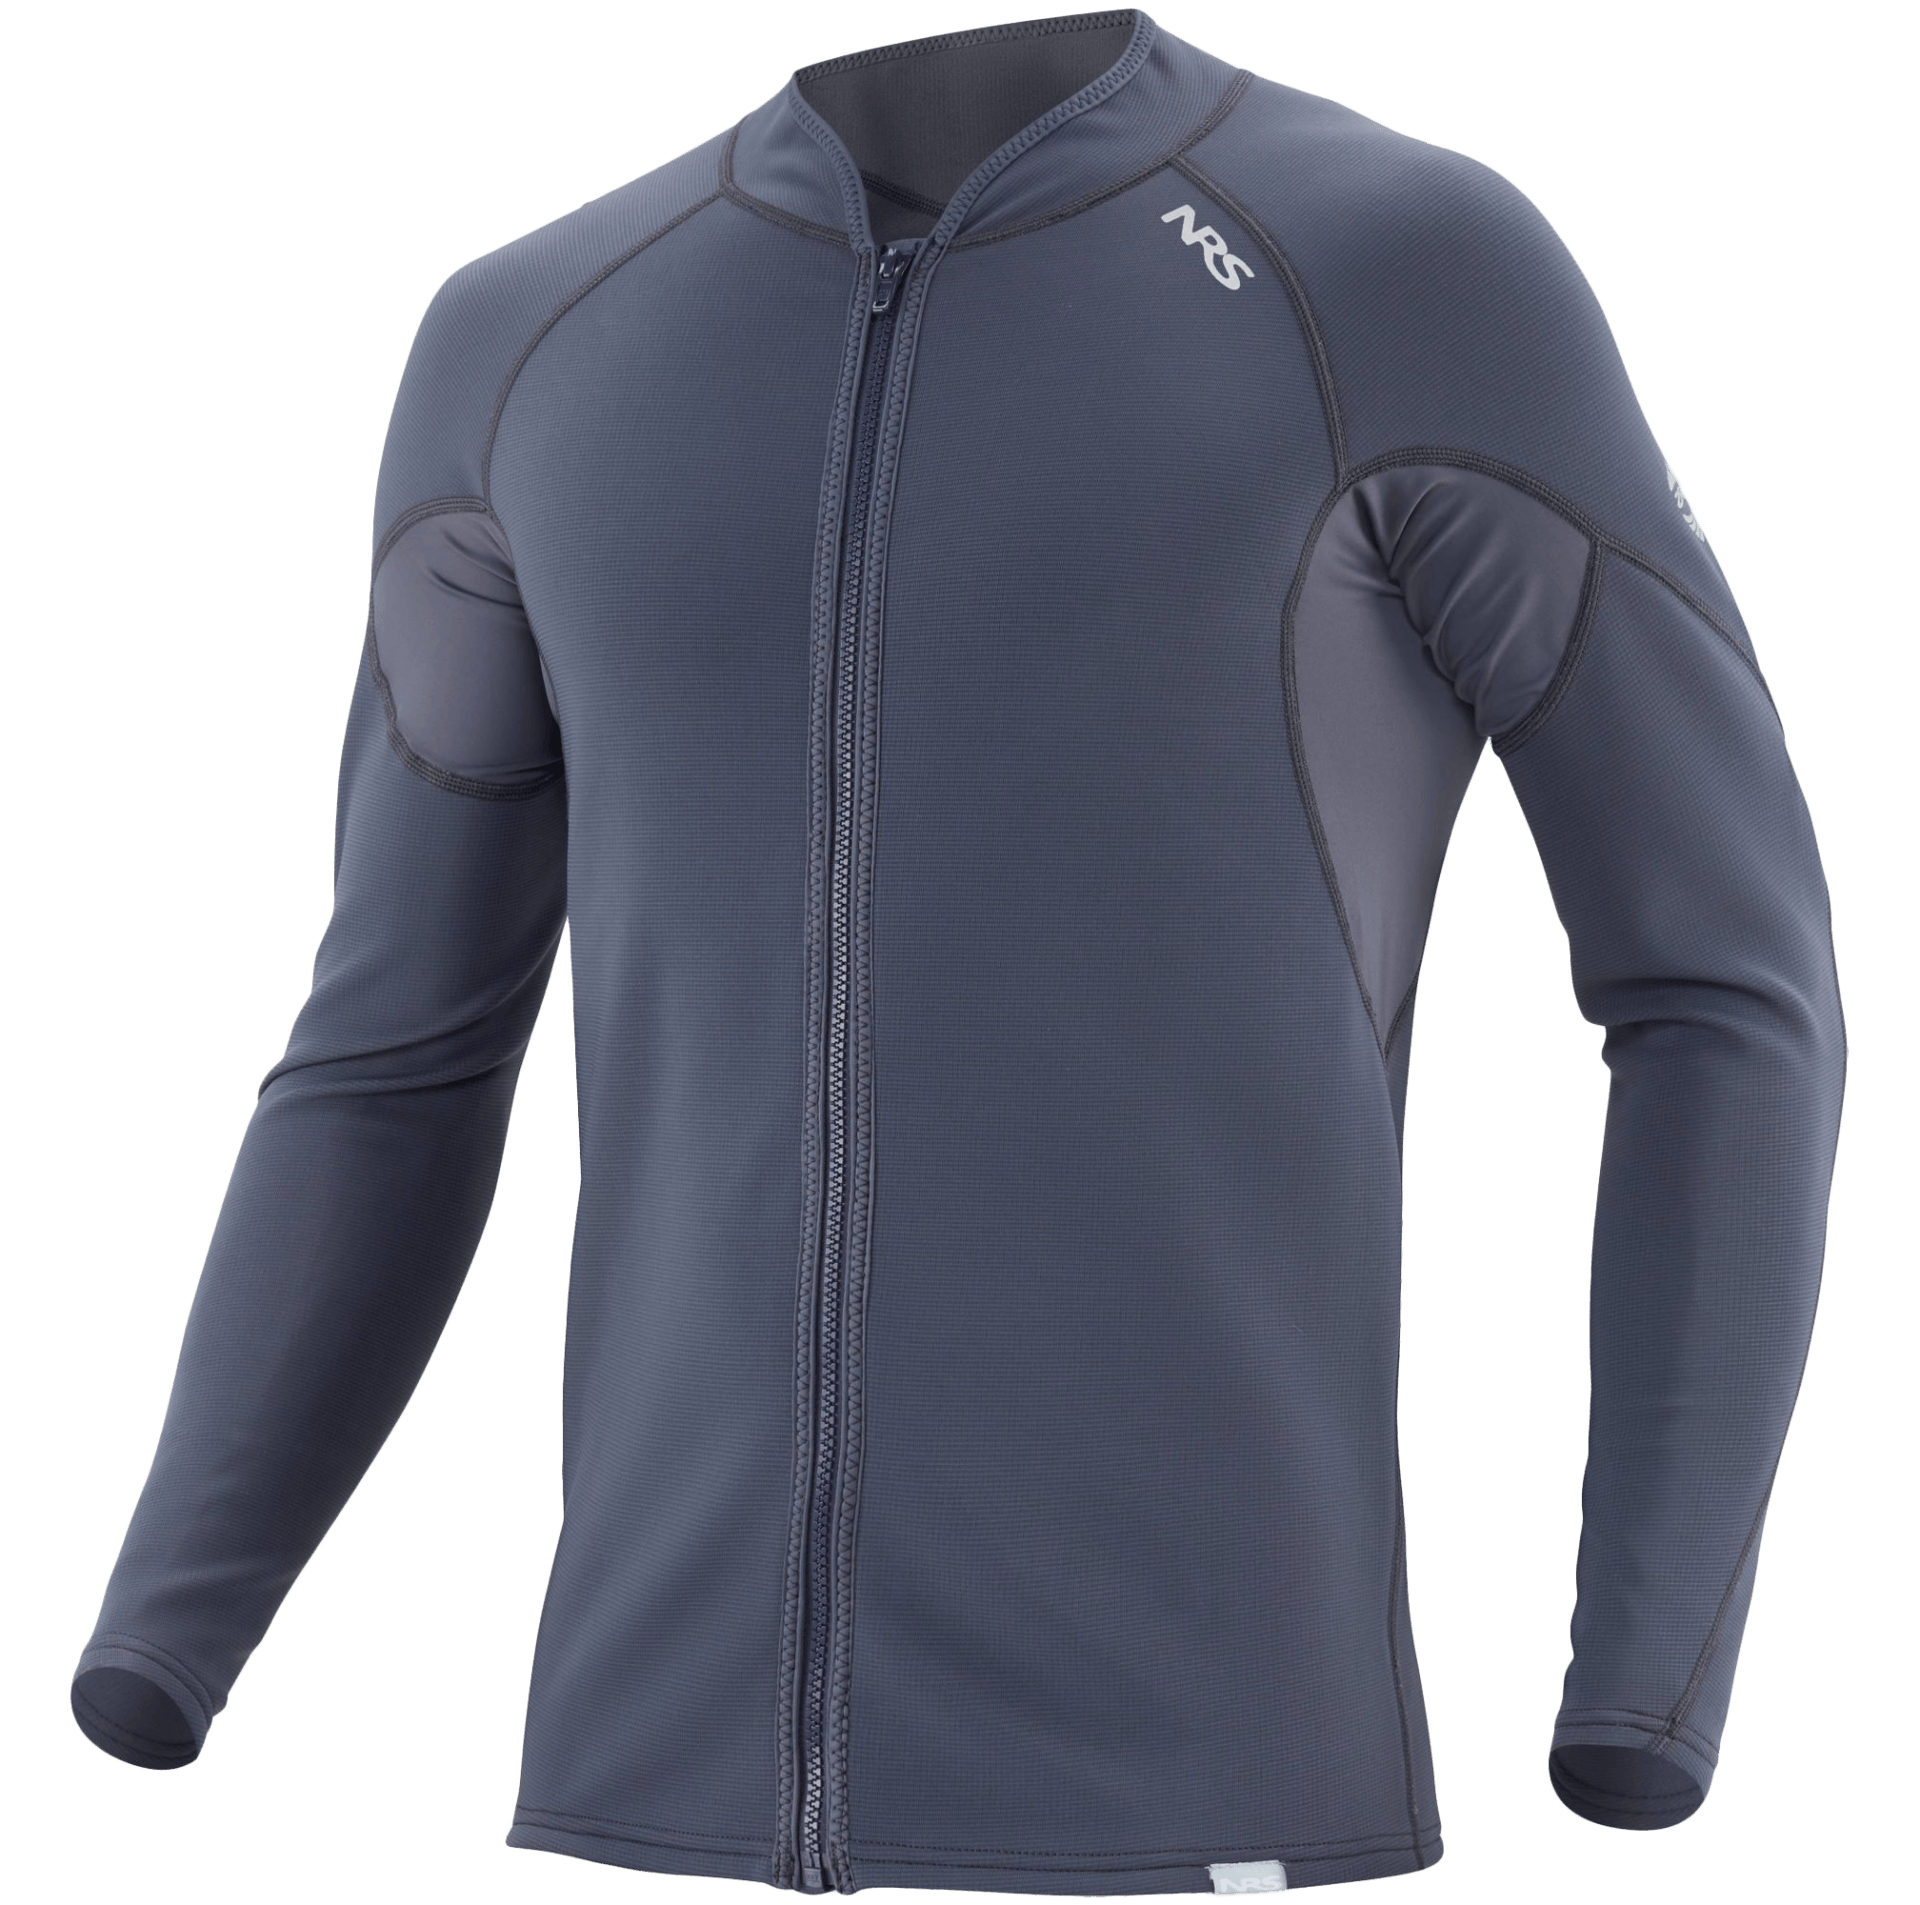 nrs_m_hydroskin_05mm_jacket_left_angle.png